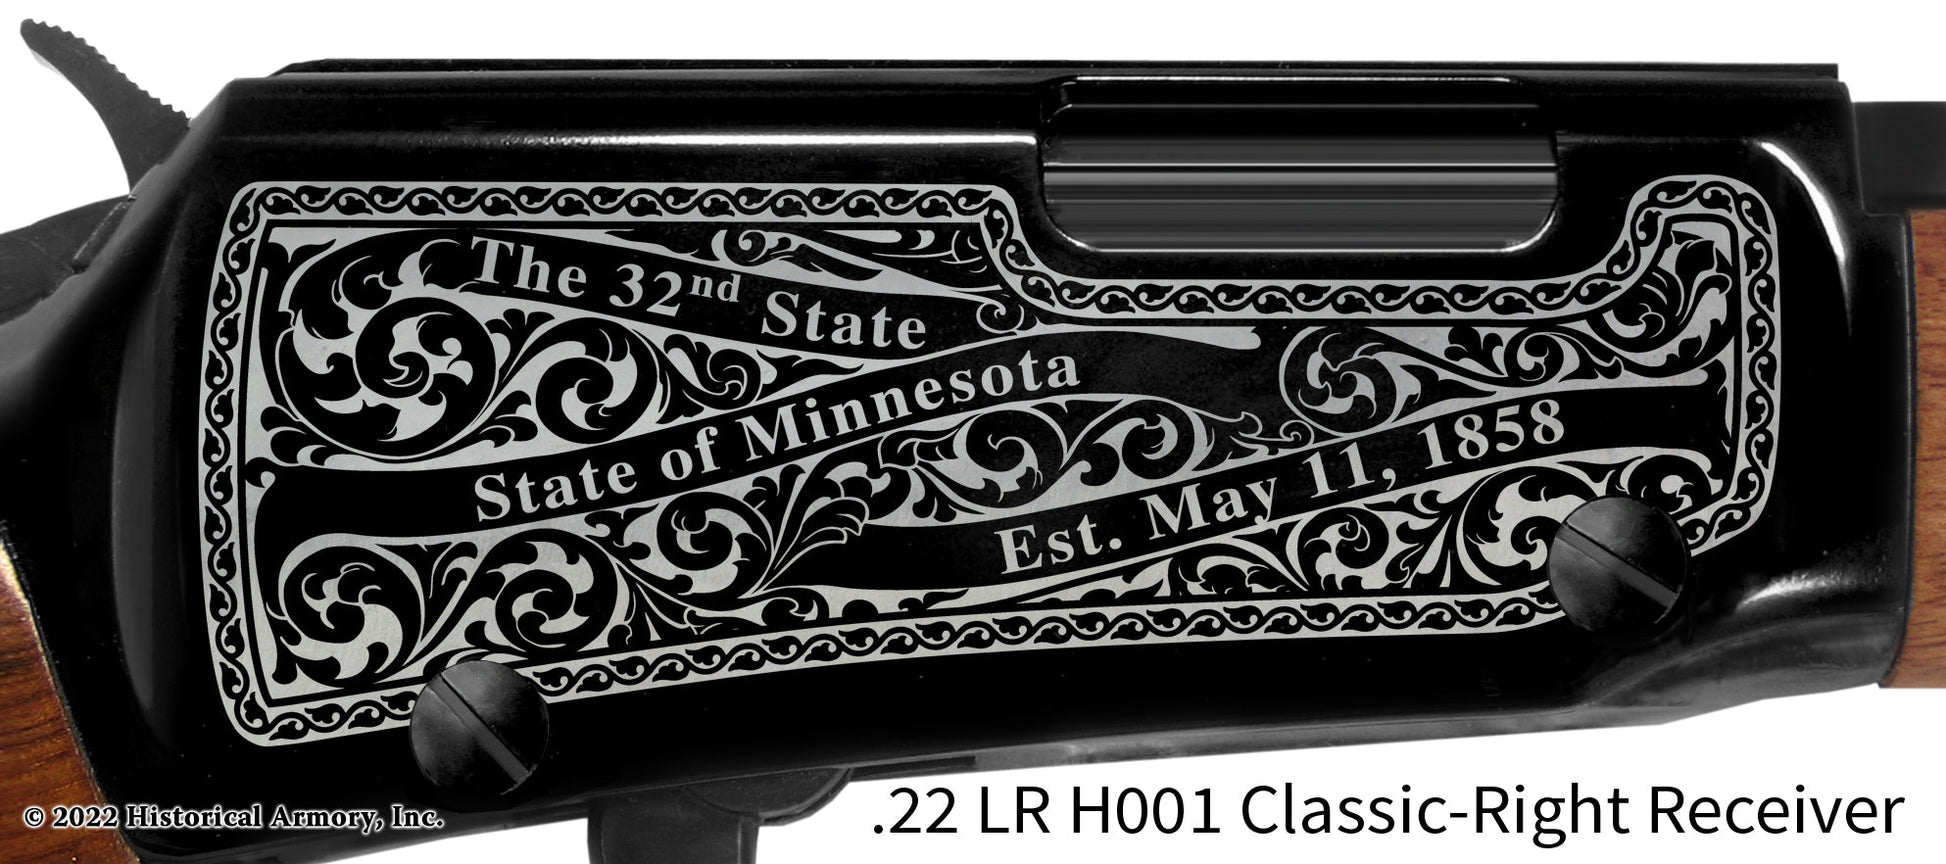 Todd County Minnesota Engraved Henry H001 Rifle